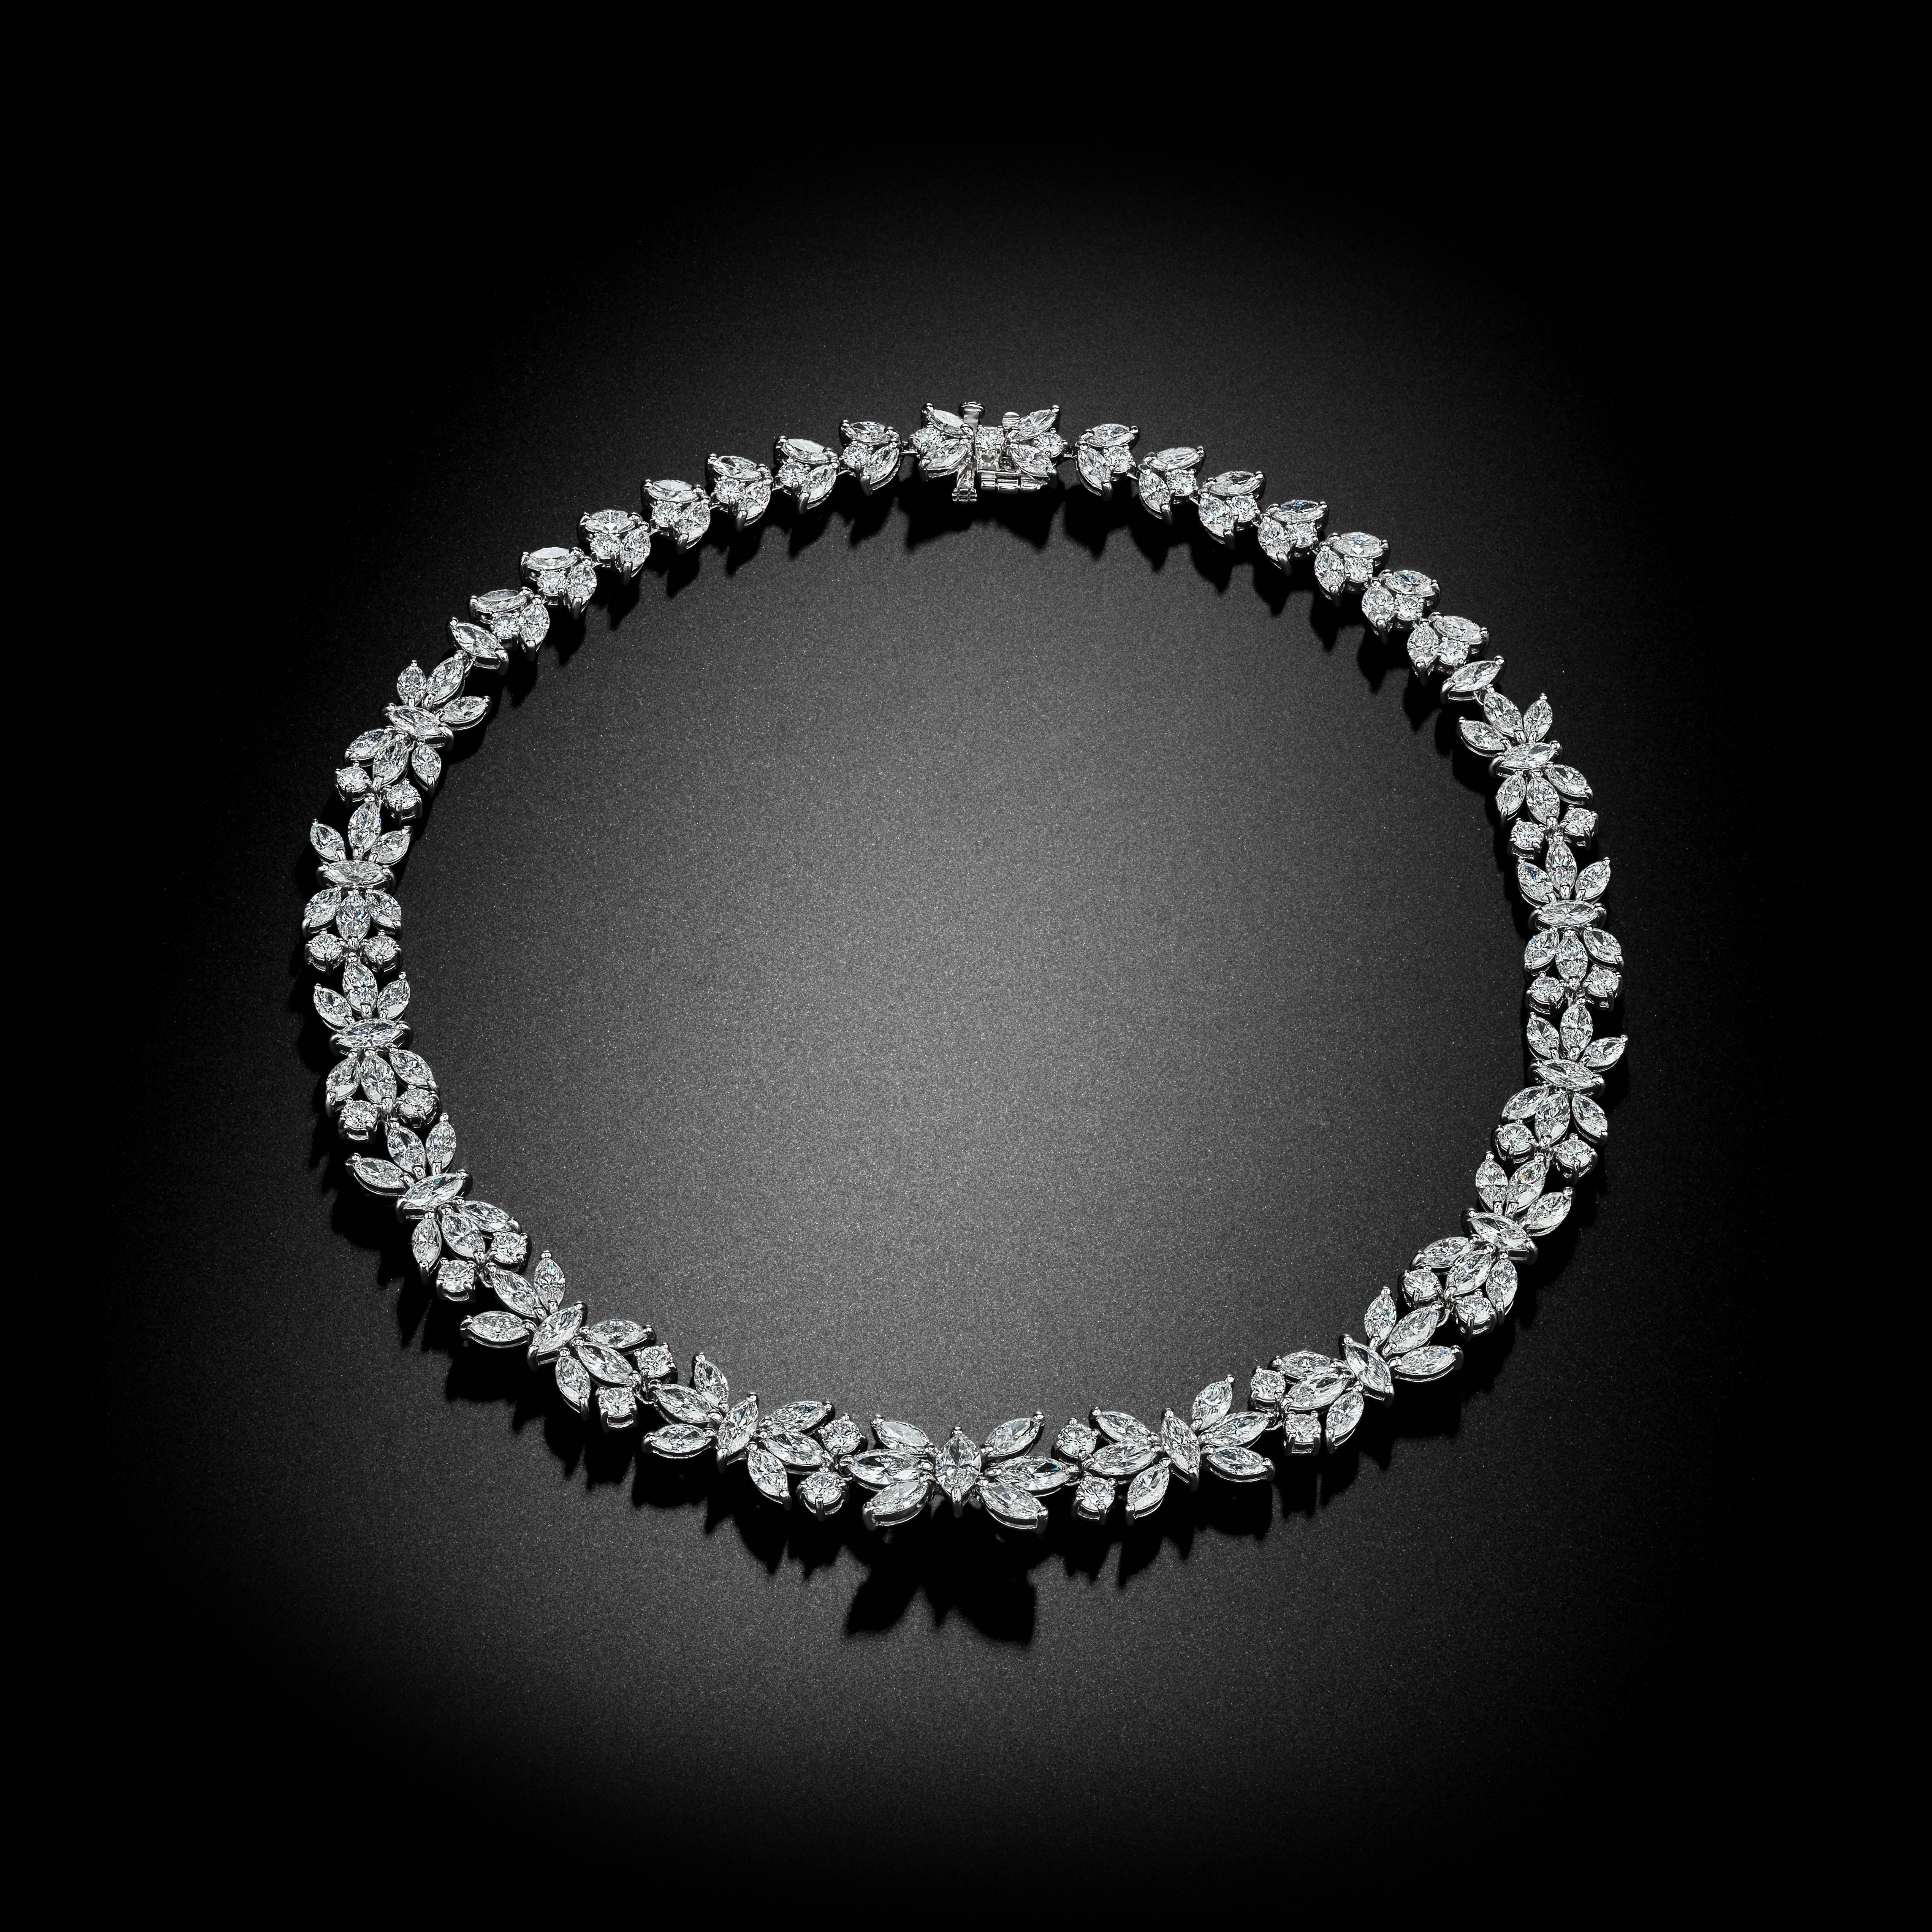 This handmade Platinum Necklace is set with Brilliant and Marquise Shape Diamonds and has an approximate total weight of 49.75ct tw. A unique and timeless piece!

David Rosenberg is President of the Diamond Bourse of the Southeastern United States